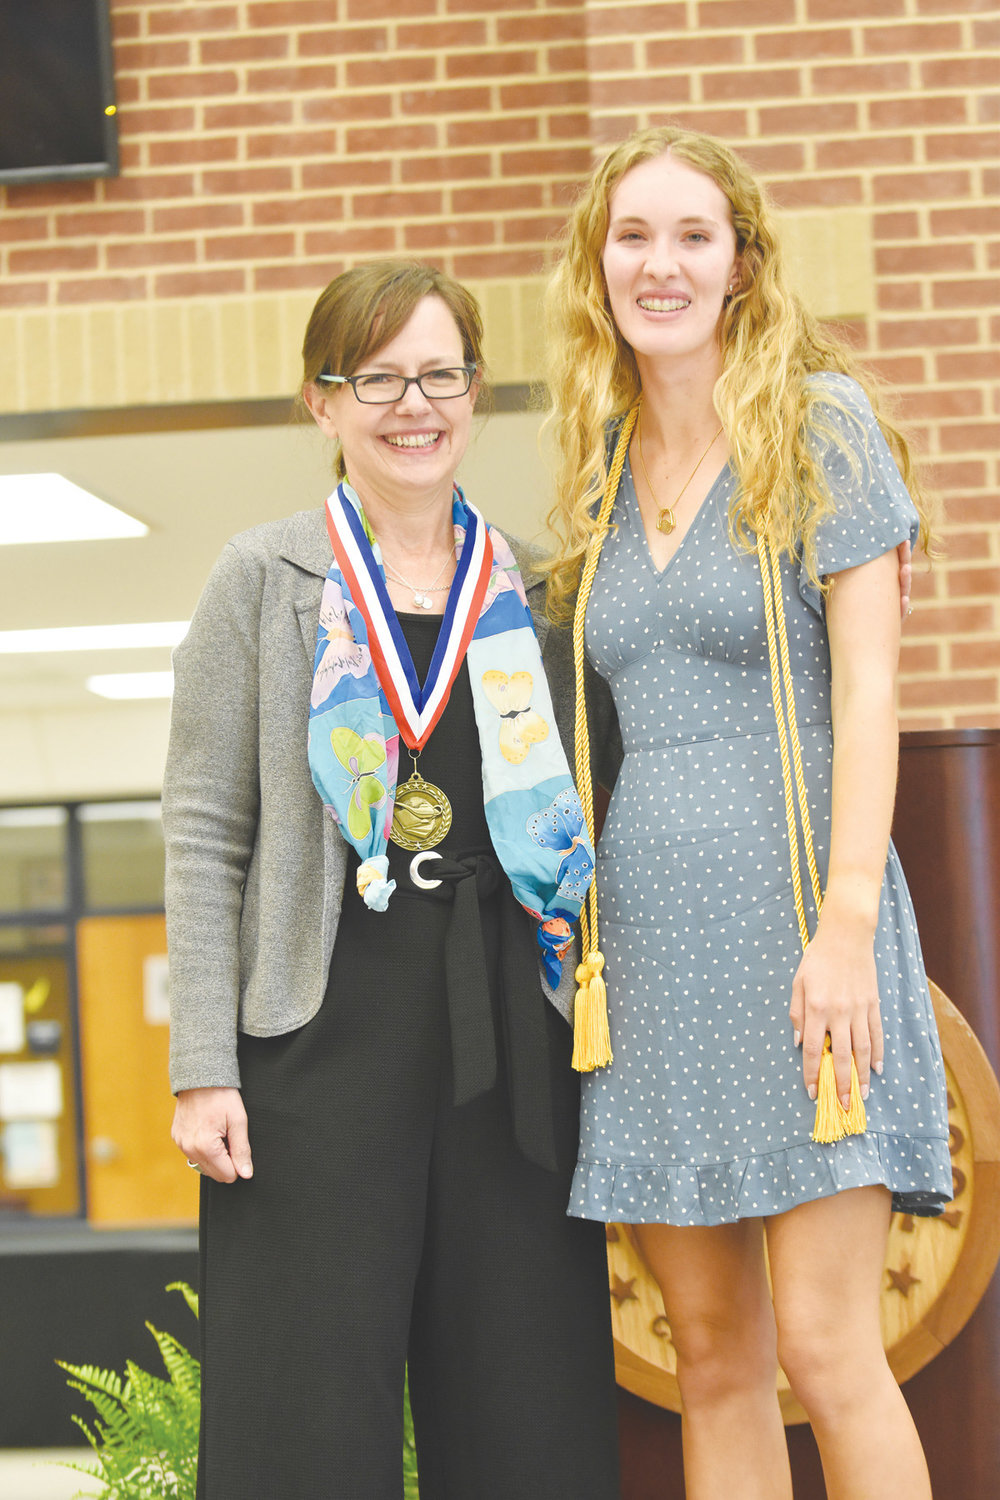 Payton Bierle is the daughter of Patrick and April Bierle. Payton plans to attend Texas A&M University, major in industrial engineering, and become an energy efficiency engineer. Payton honored Mrs. Janie Hampton.